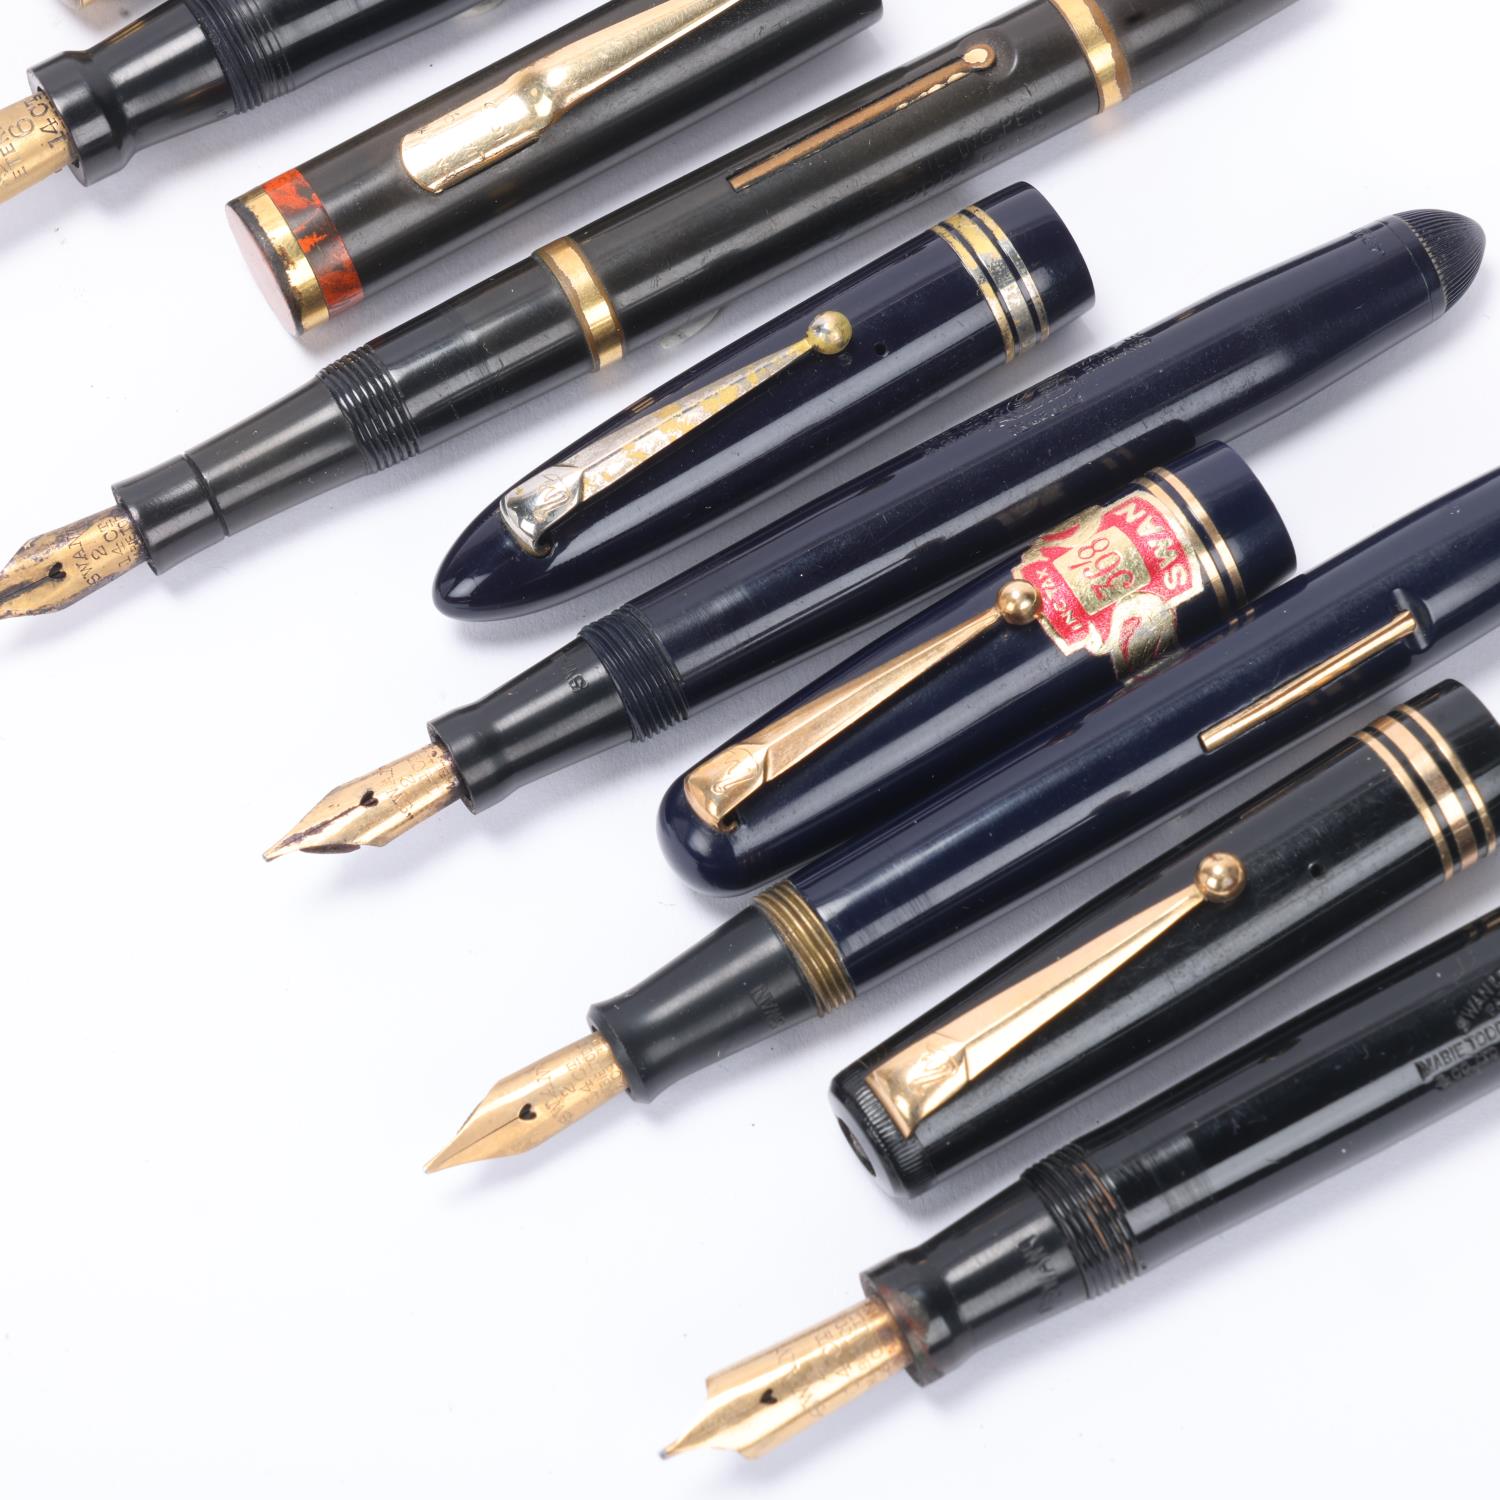 6 vintage Mabie, Todd & Co / Swan fountain pens, models include, Leverless, Self-Filler, Eternal, - Image 2 of 4